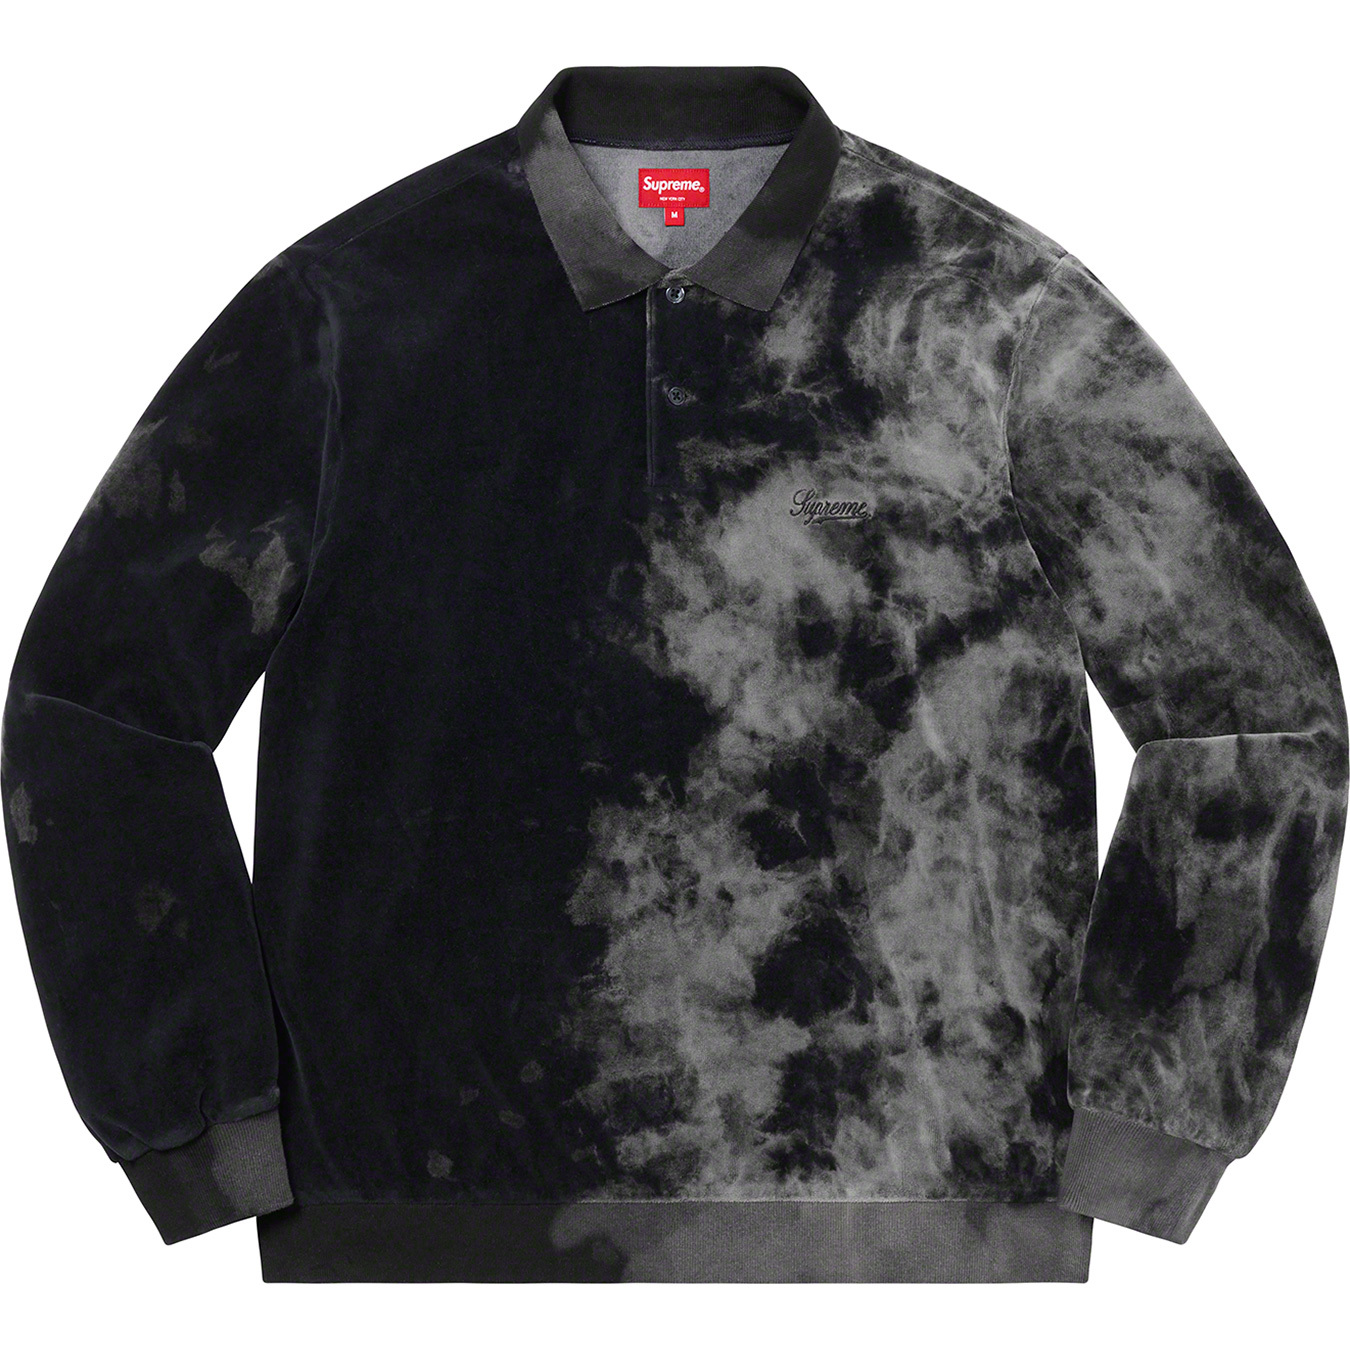 Supreme Bleached Velour L/S Polo ニットポロ全体の写真撮って頂きたいです